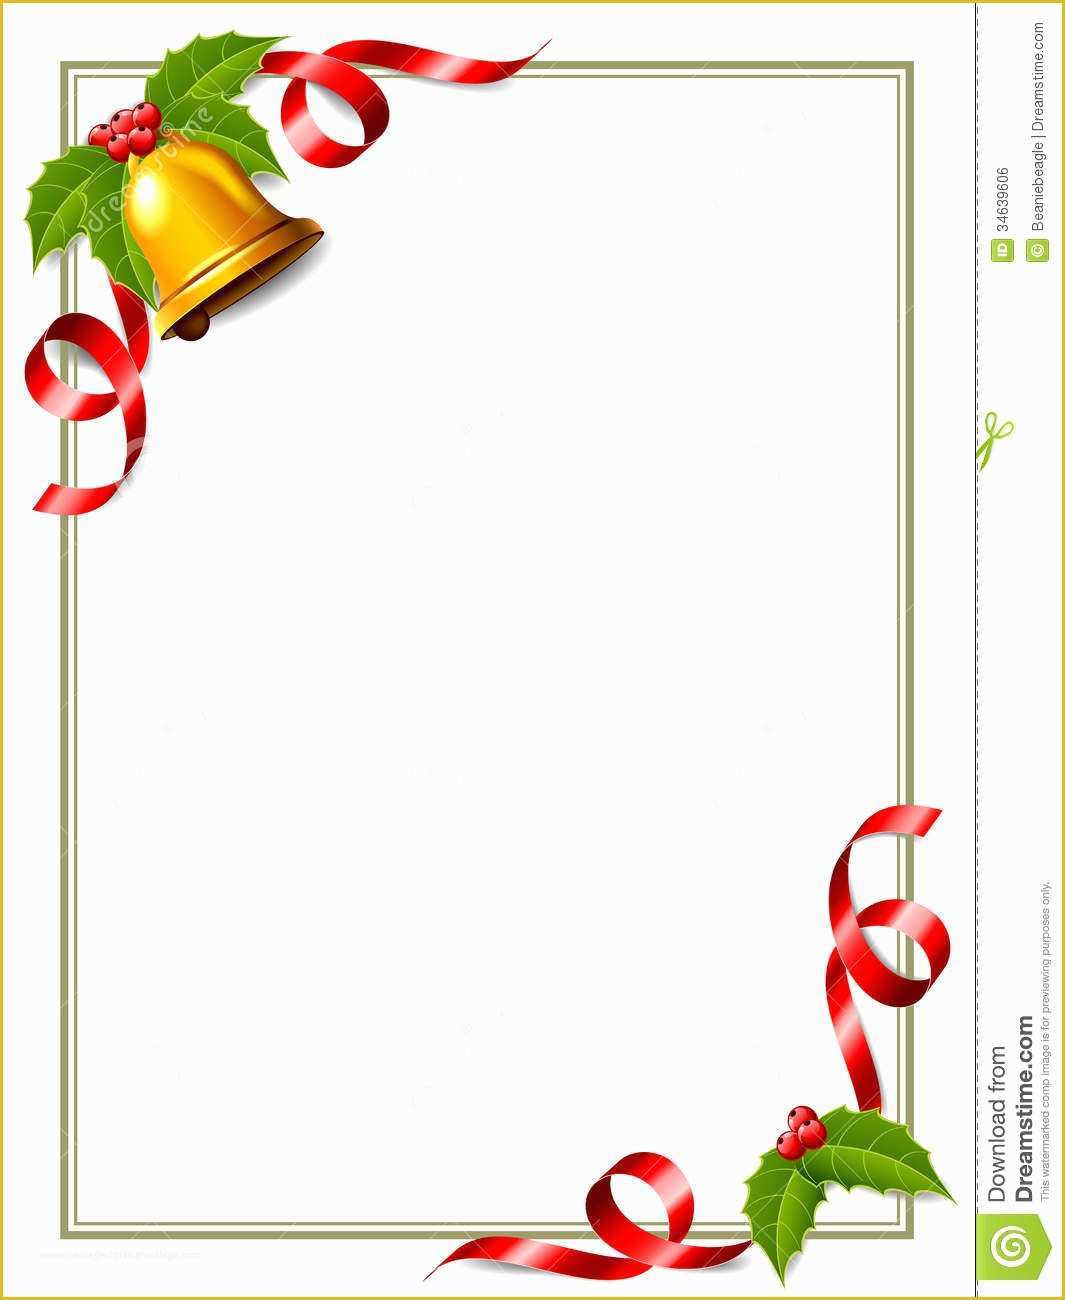 Christmas Letter Border Templates Free Of Christmas Letter Border Template Collection